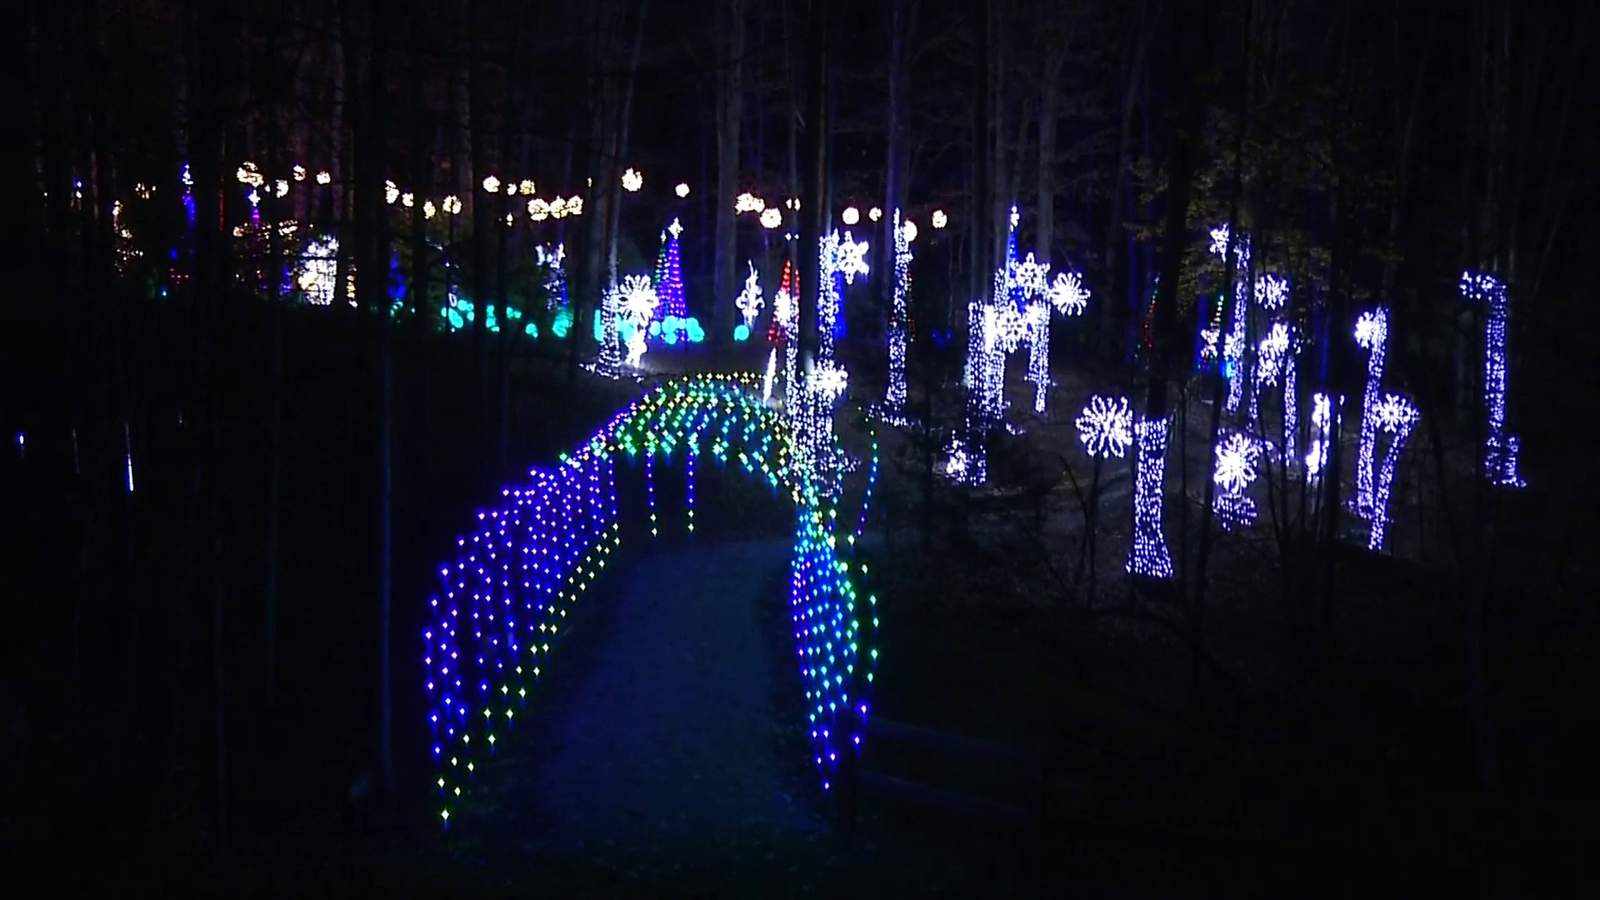 Illuminights promises the same holiday fun, with one big difference this year